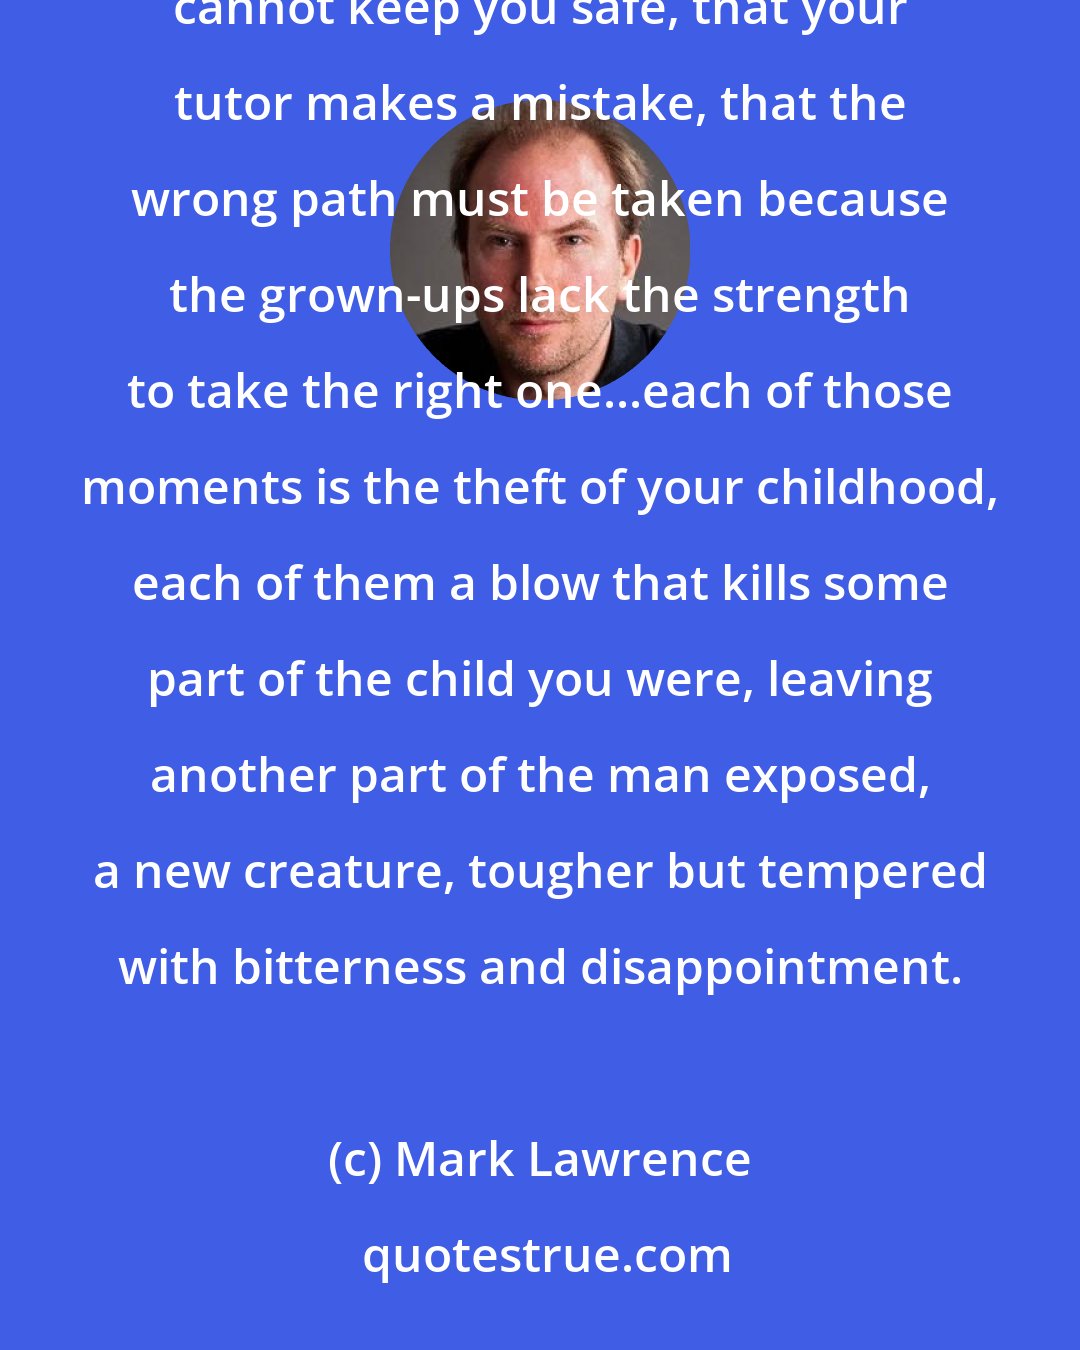 Mark Lawrence: As a child there's a horror in discovering the limitations of the ones you love. The time you find that your mother cannot keep you safe, that your tutor makes a mistake, that the wrong path must be taken because the grown-ups lack the strength to take the right one...each of those moments is the theft of your childhood, each of them a blow that kills some part of the child you were, leaving another part of the man exposed, a new creature, tougher but tempered with bitterness and disappointment.